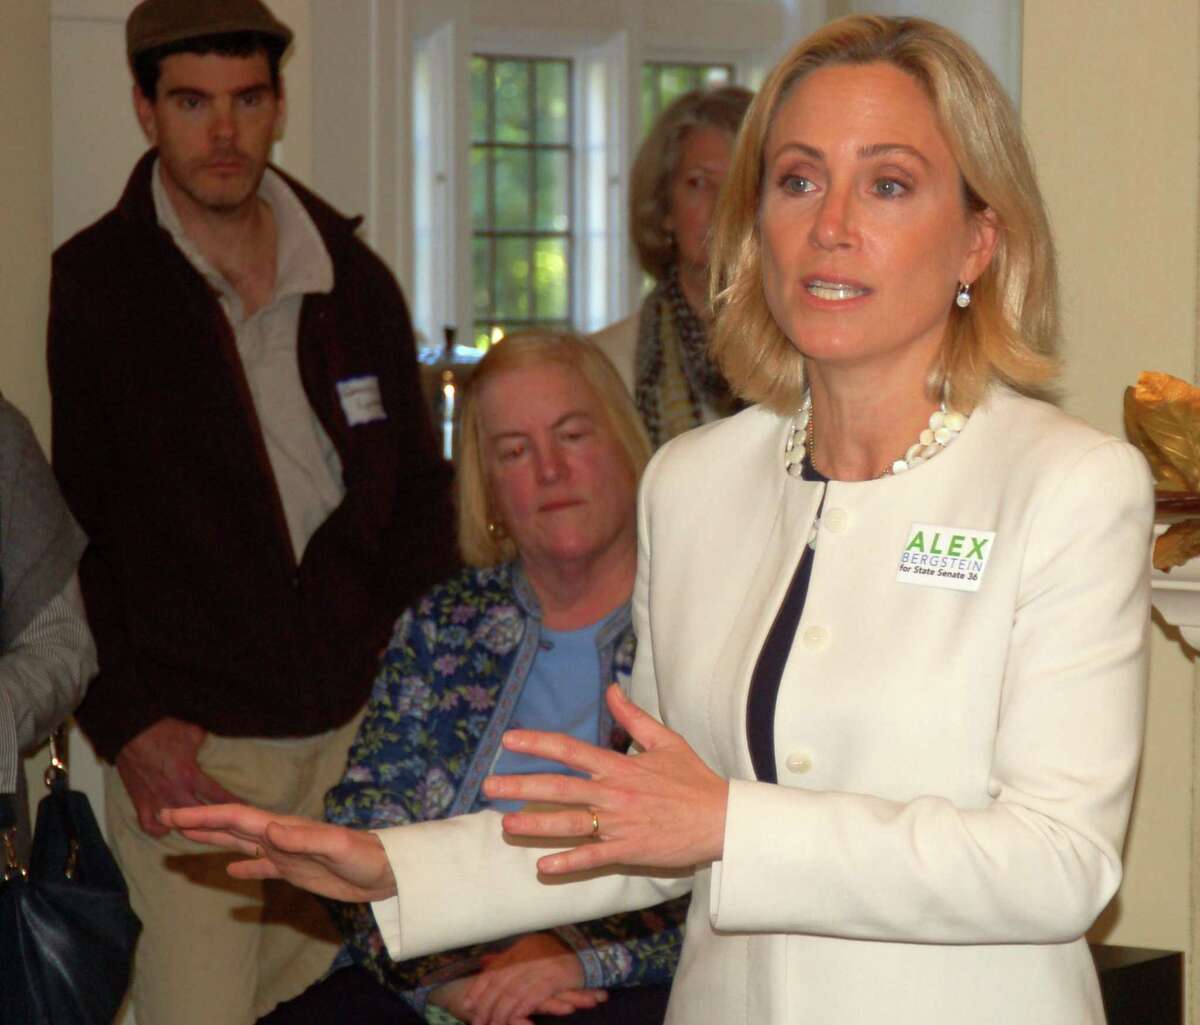 Alexandra Bergstein, Democratic candidate for state Senate District 36, and Lt. Governor candidate Susan Bysiewicz campaigned at an event at the home of former Greenwich Selectwoman Lin Lavery in Greenwich on Tuesday, Oct. 23, 2018. The two took the opportunity to urge their supporters to get out the vote.